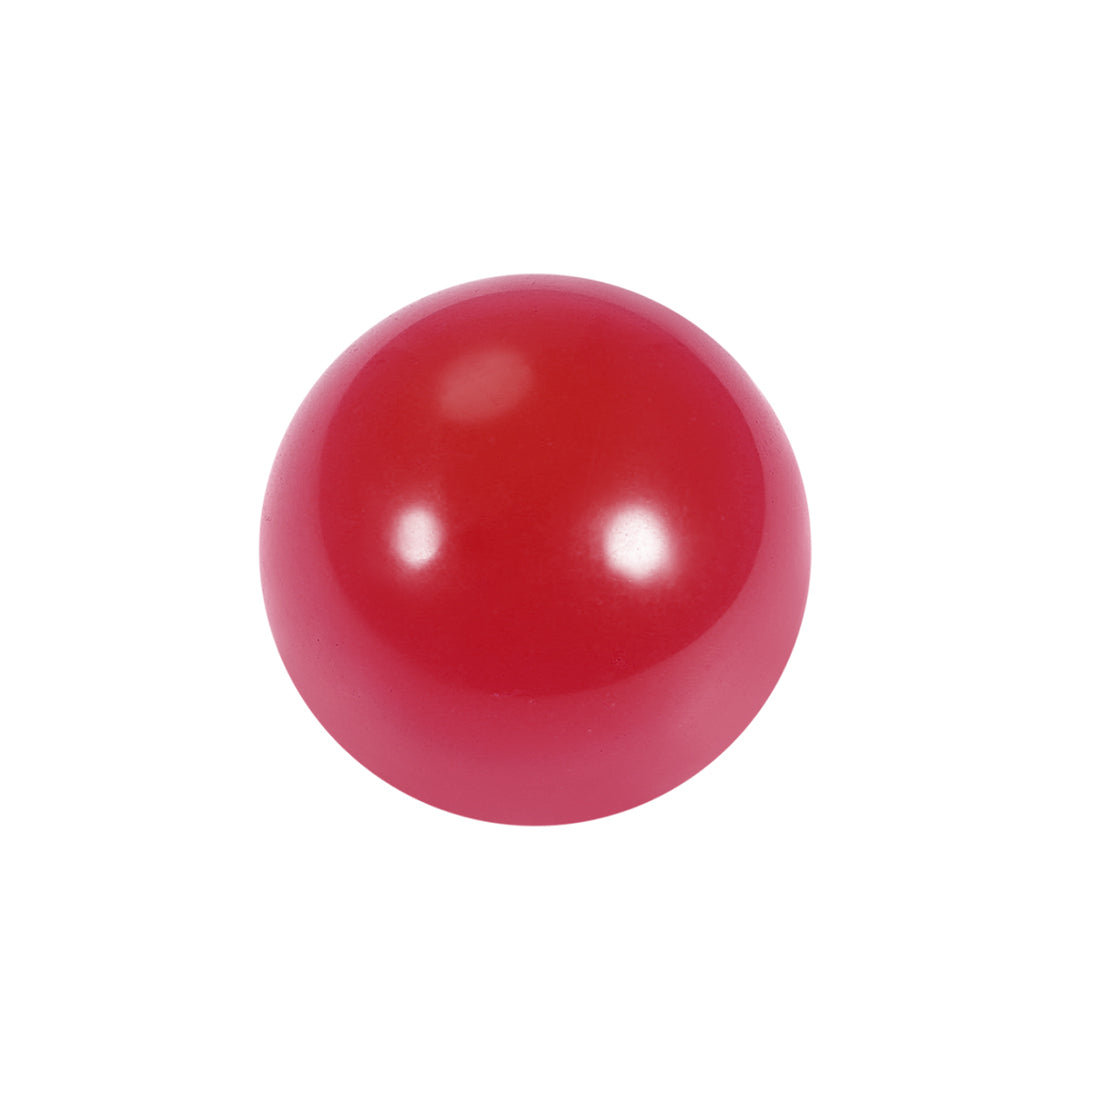 uxcell Uxcell 40mm Dia Acrylic Ball Red Sphere Ornament Solid Balls 1.6 inches for Home Decor